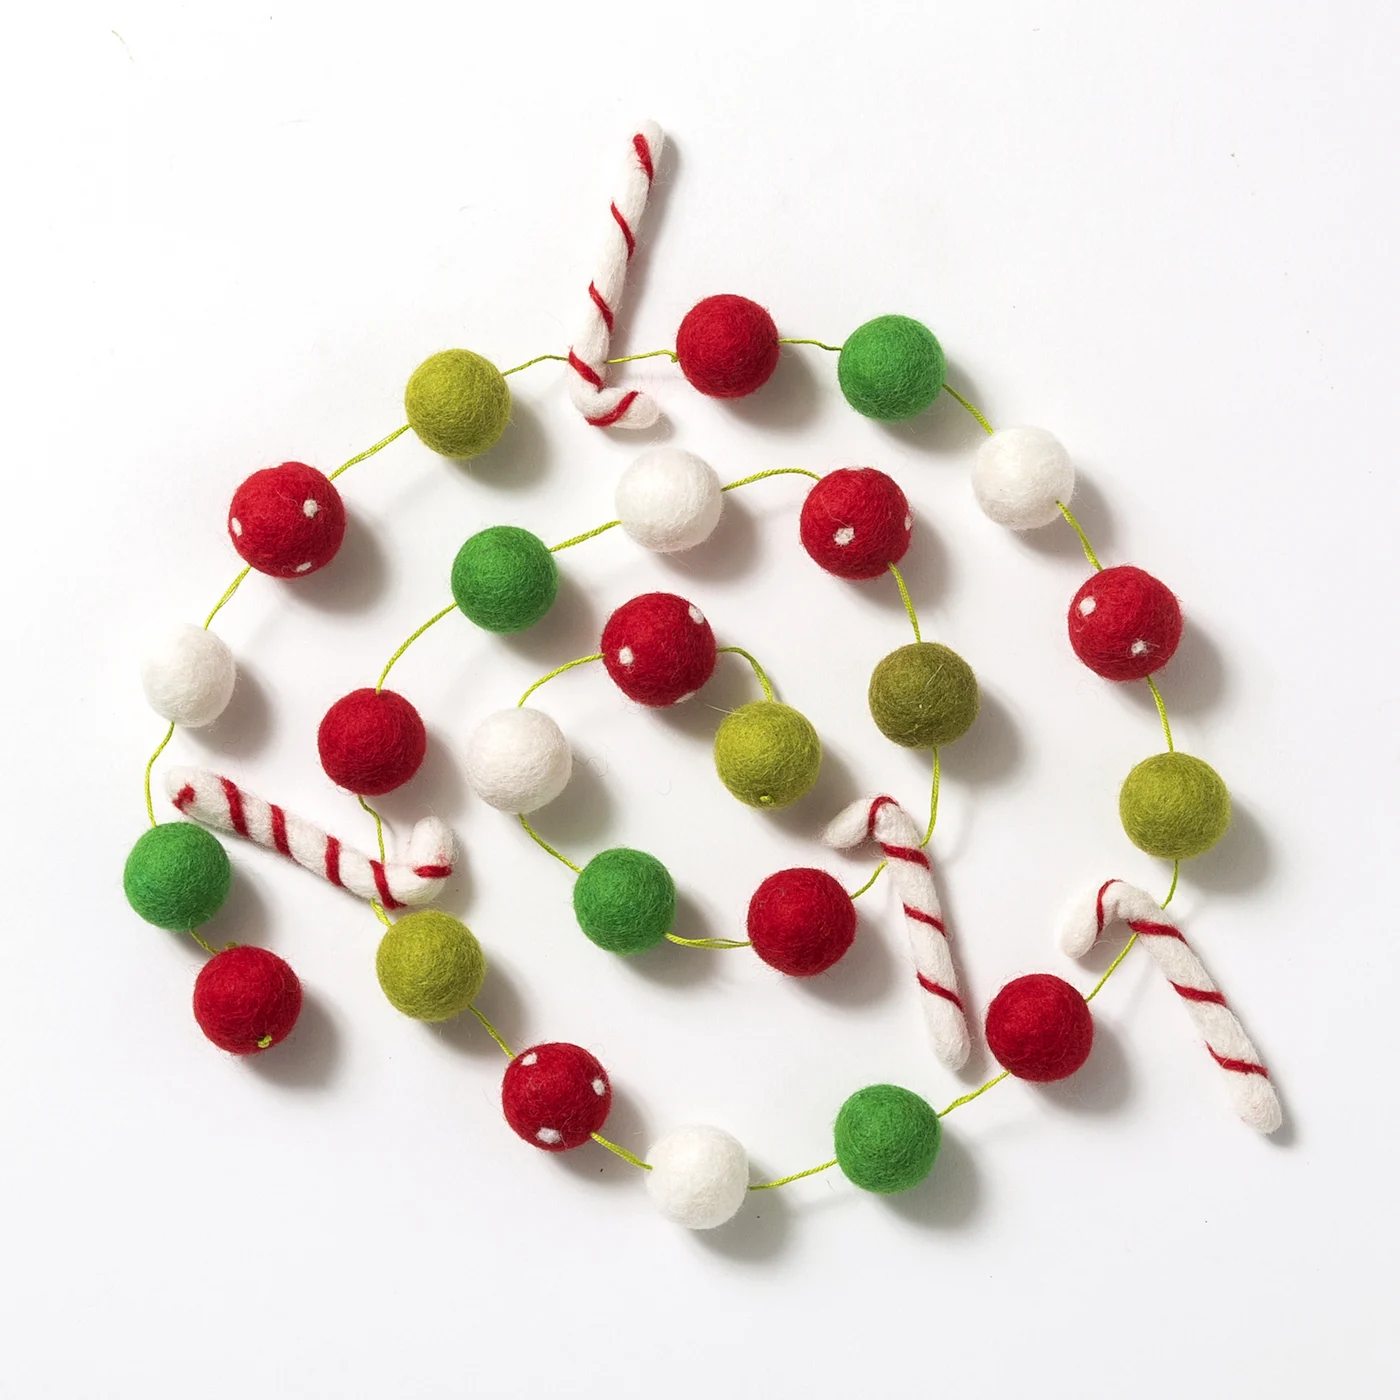 Step By Step Guide - How To Make A Felt Ball Christmas Garland